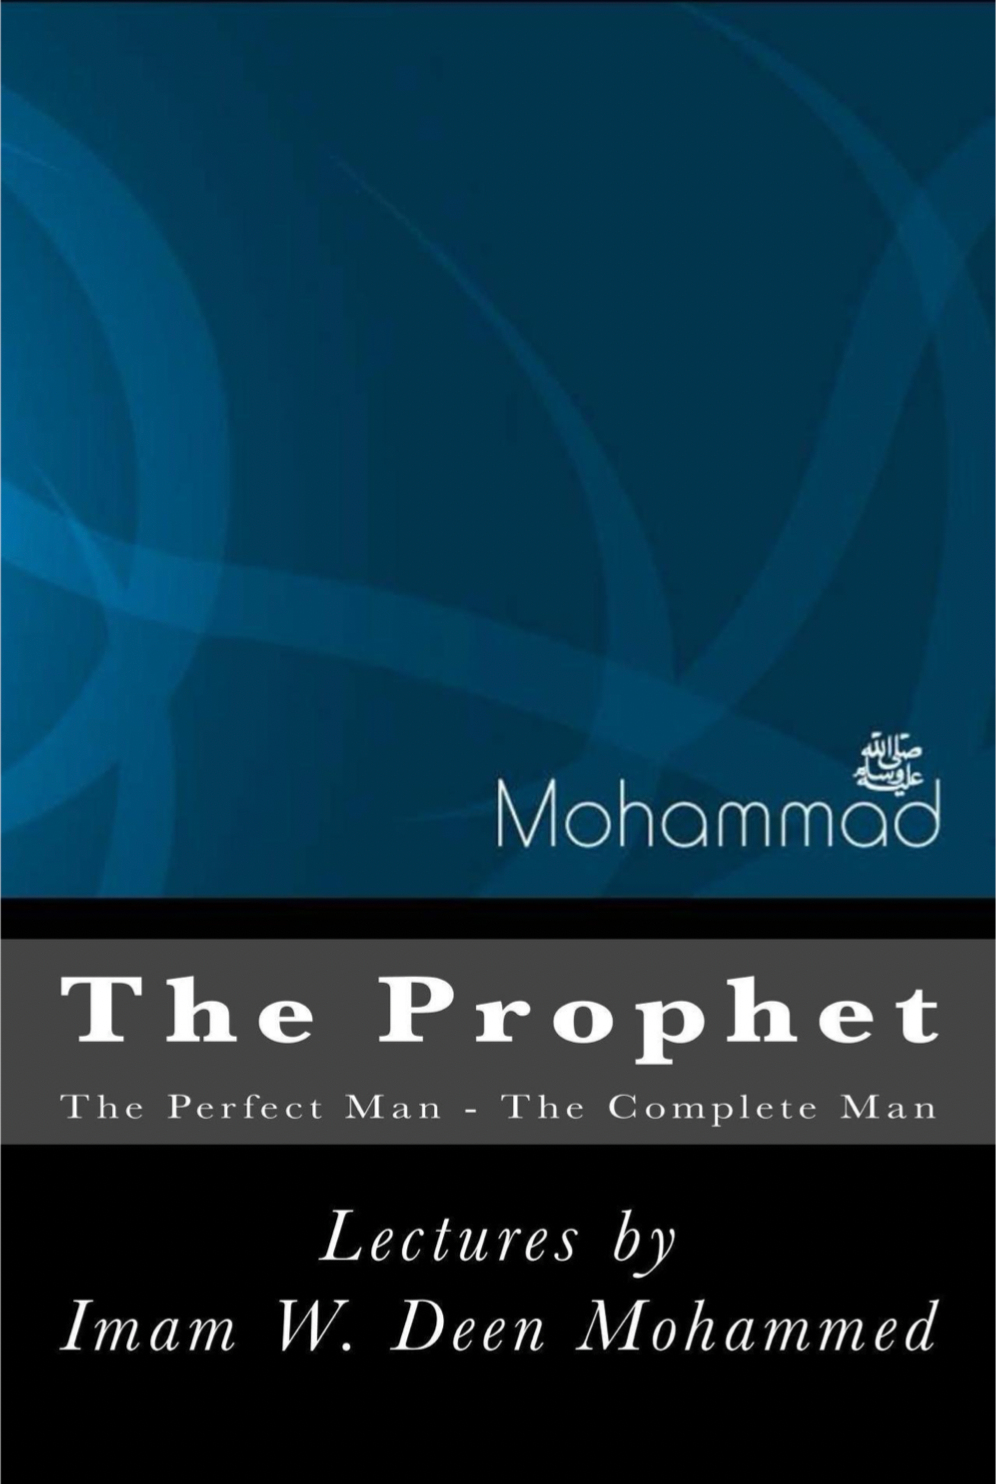 MOHAMMED THE PROPHET (pbuh): The Perfect Man - The Complete Man